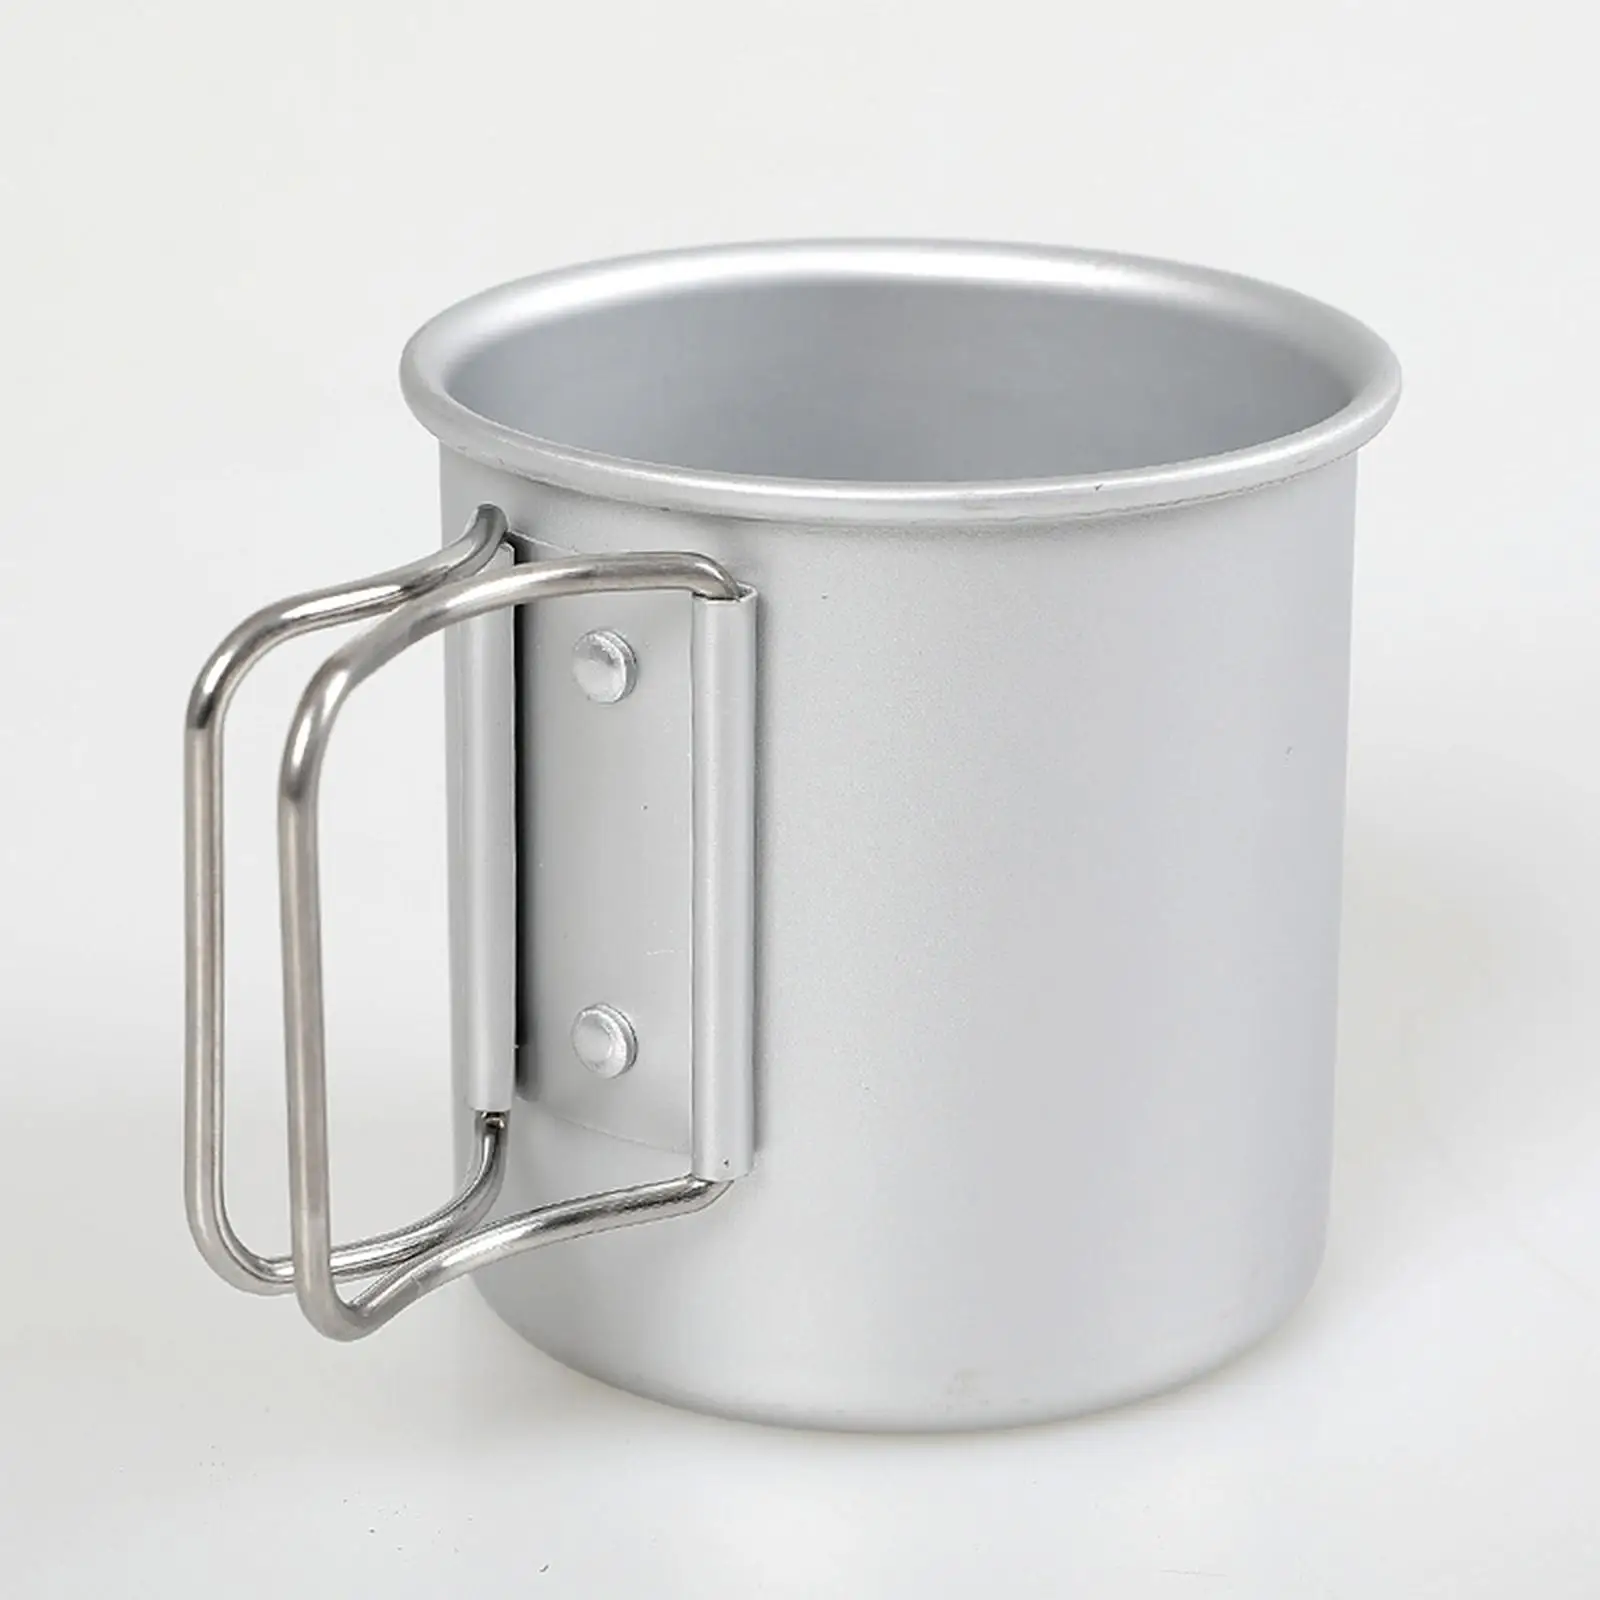 Alloy Outdoor Camping Cup with Collapsible Handle 0.3L Lightweight Easy to Use Water Cup for Backpacking Survival Fishing Hiking